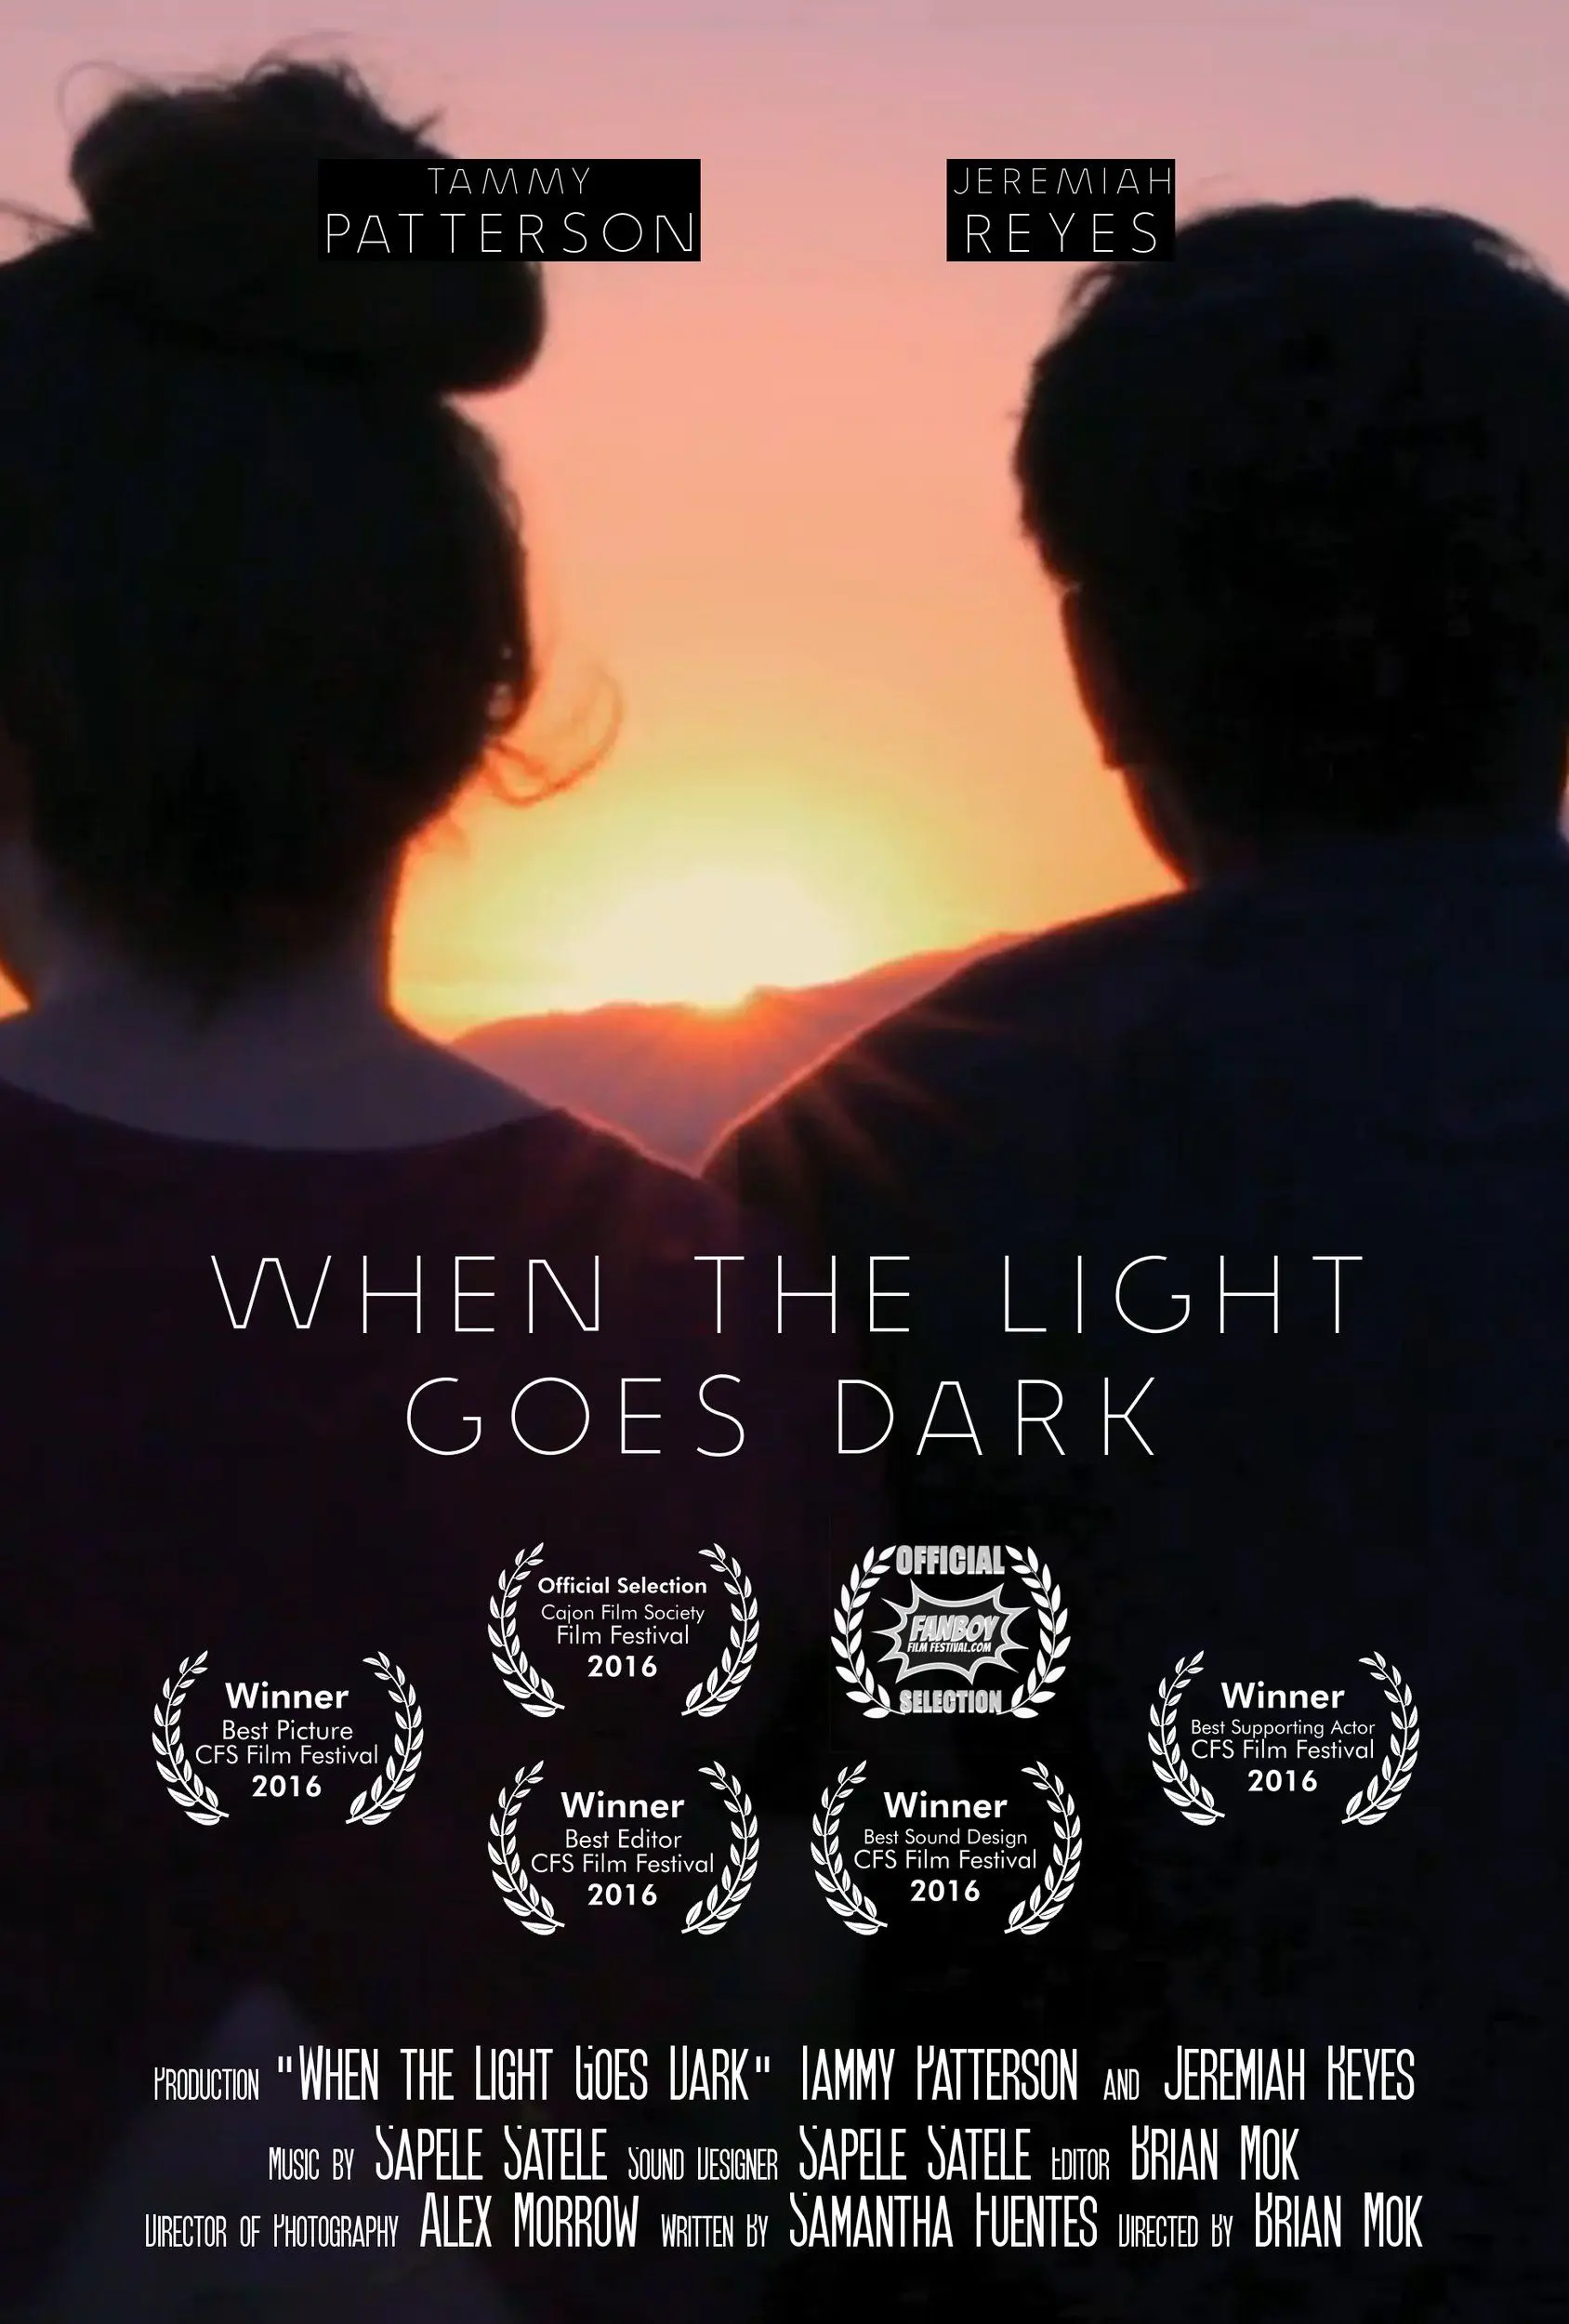 "When the Light Goes Dark" film poster. A couple sits together, backs to us, looking towards the setting sun.